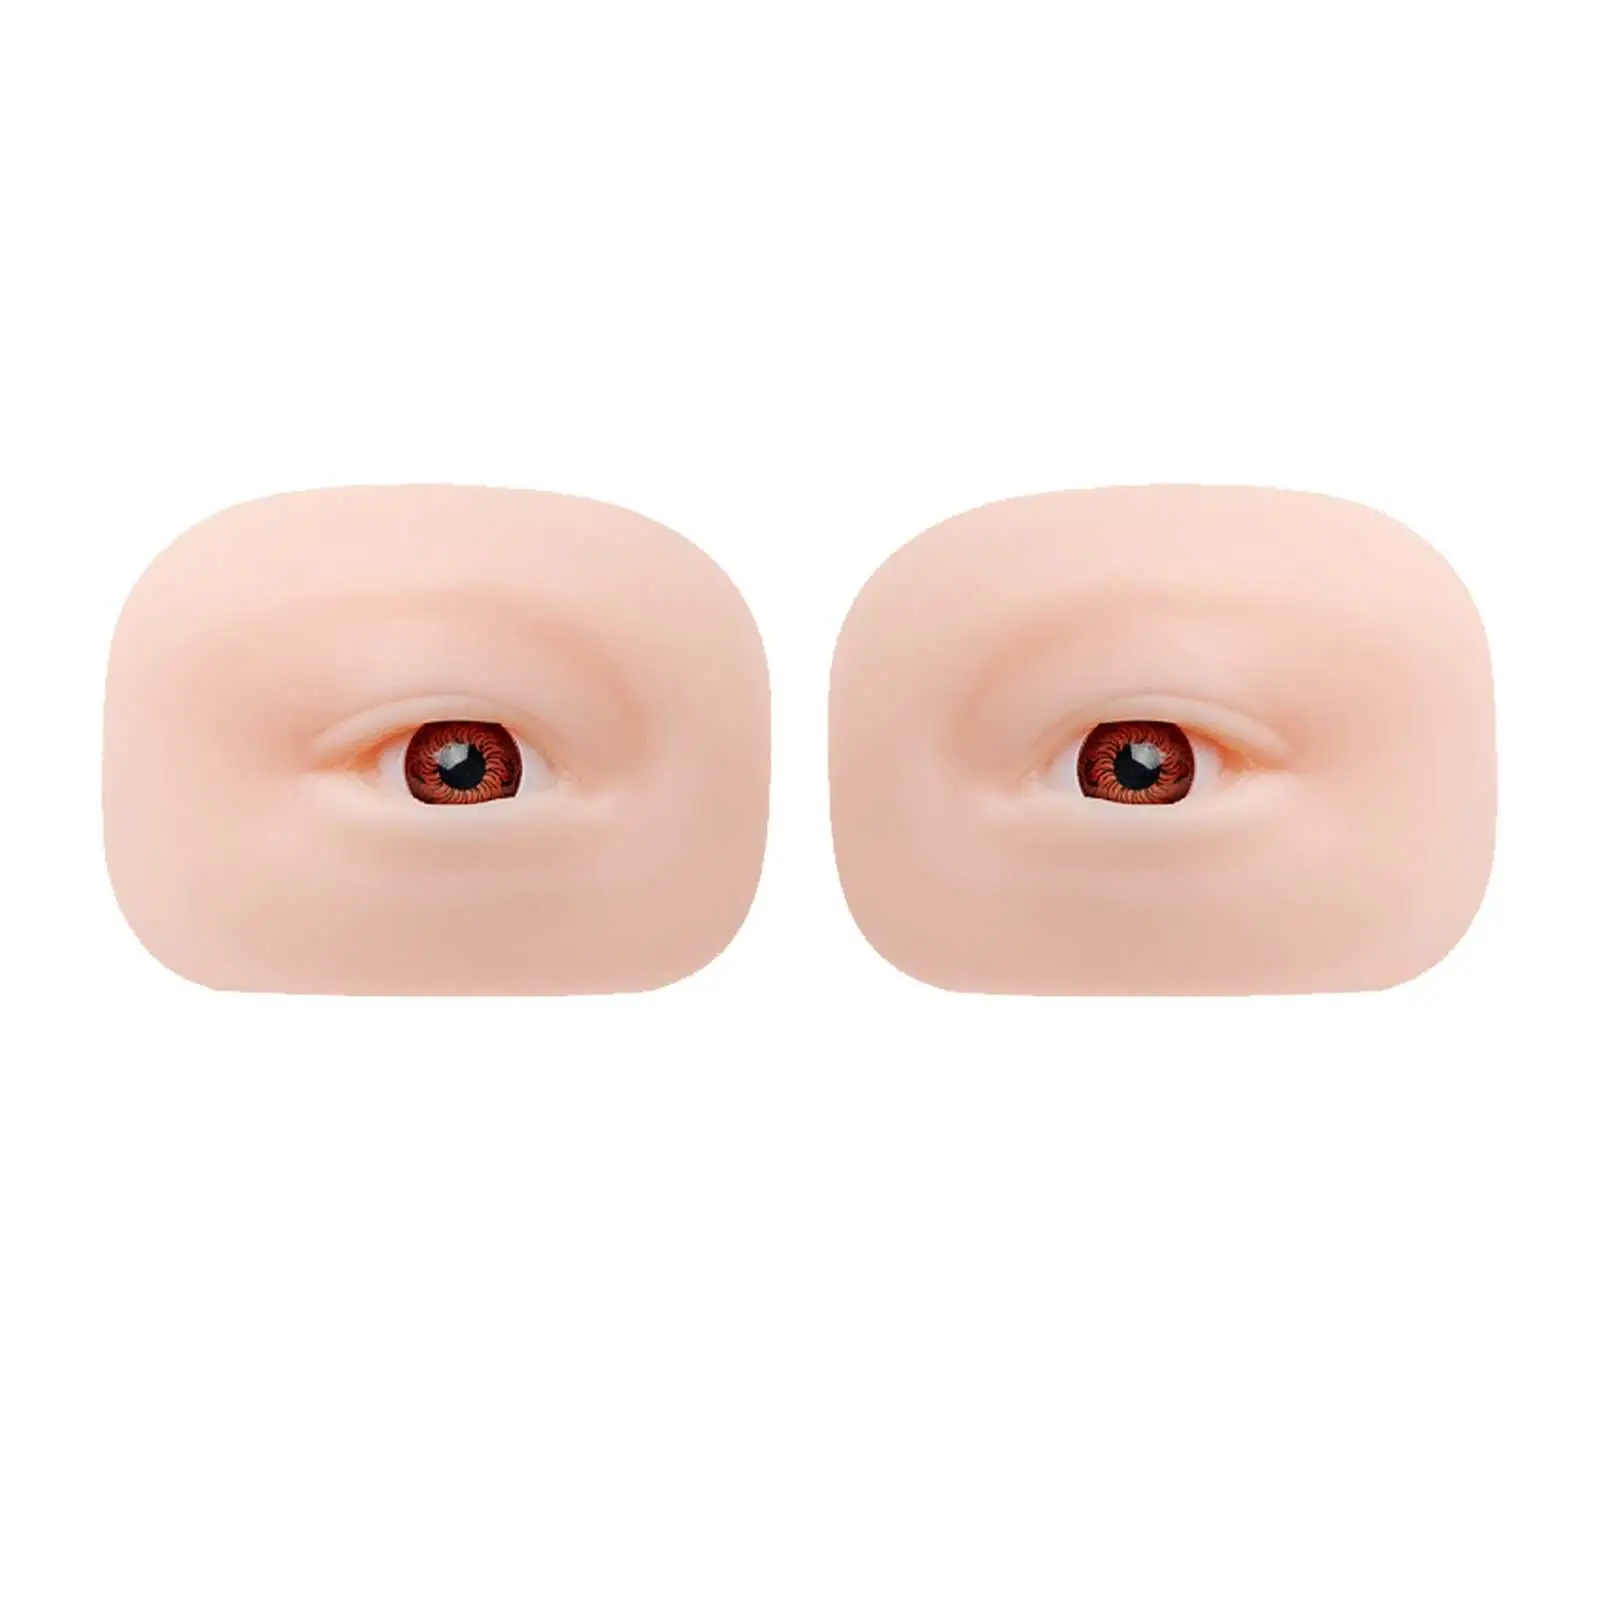 5D Silicone Eye Model Resuable for Starters Makeup Training Beauticians